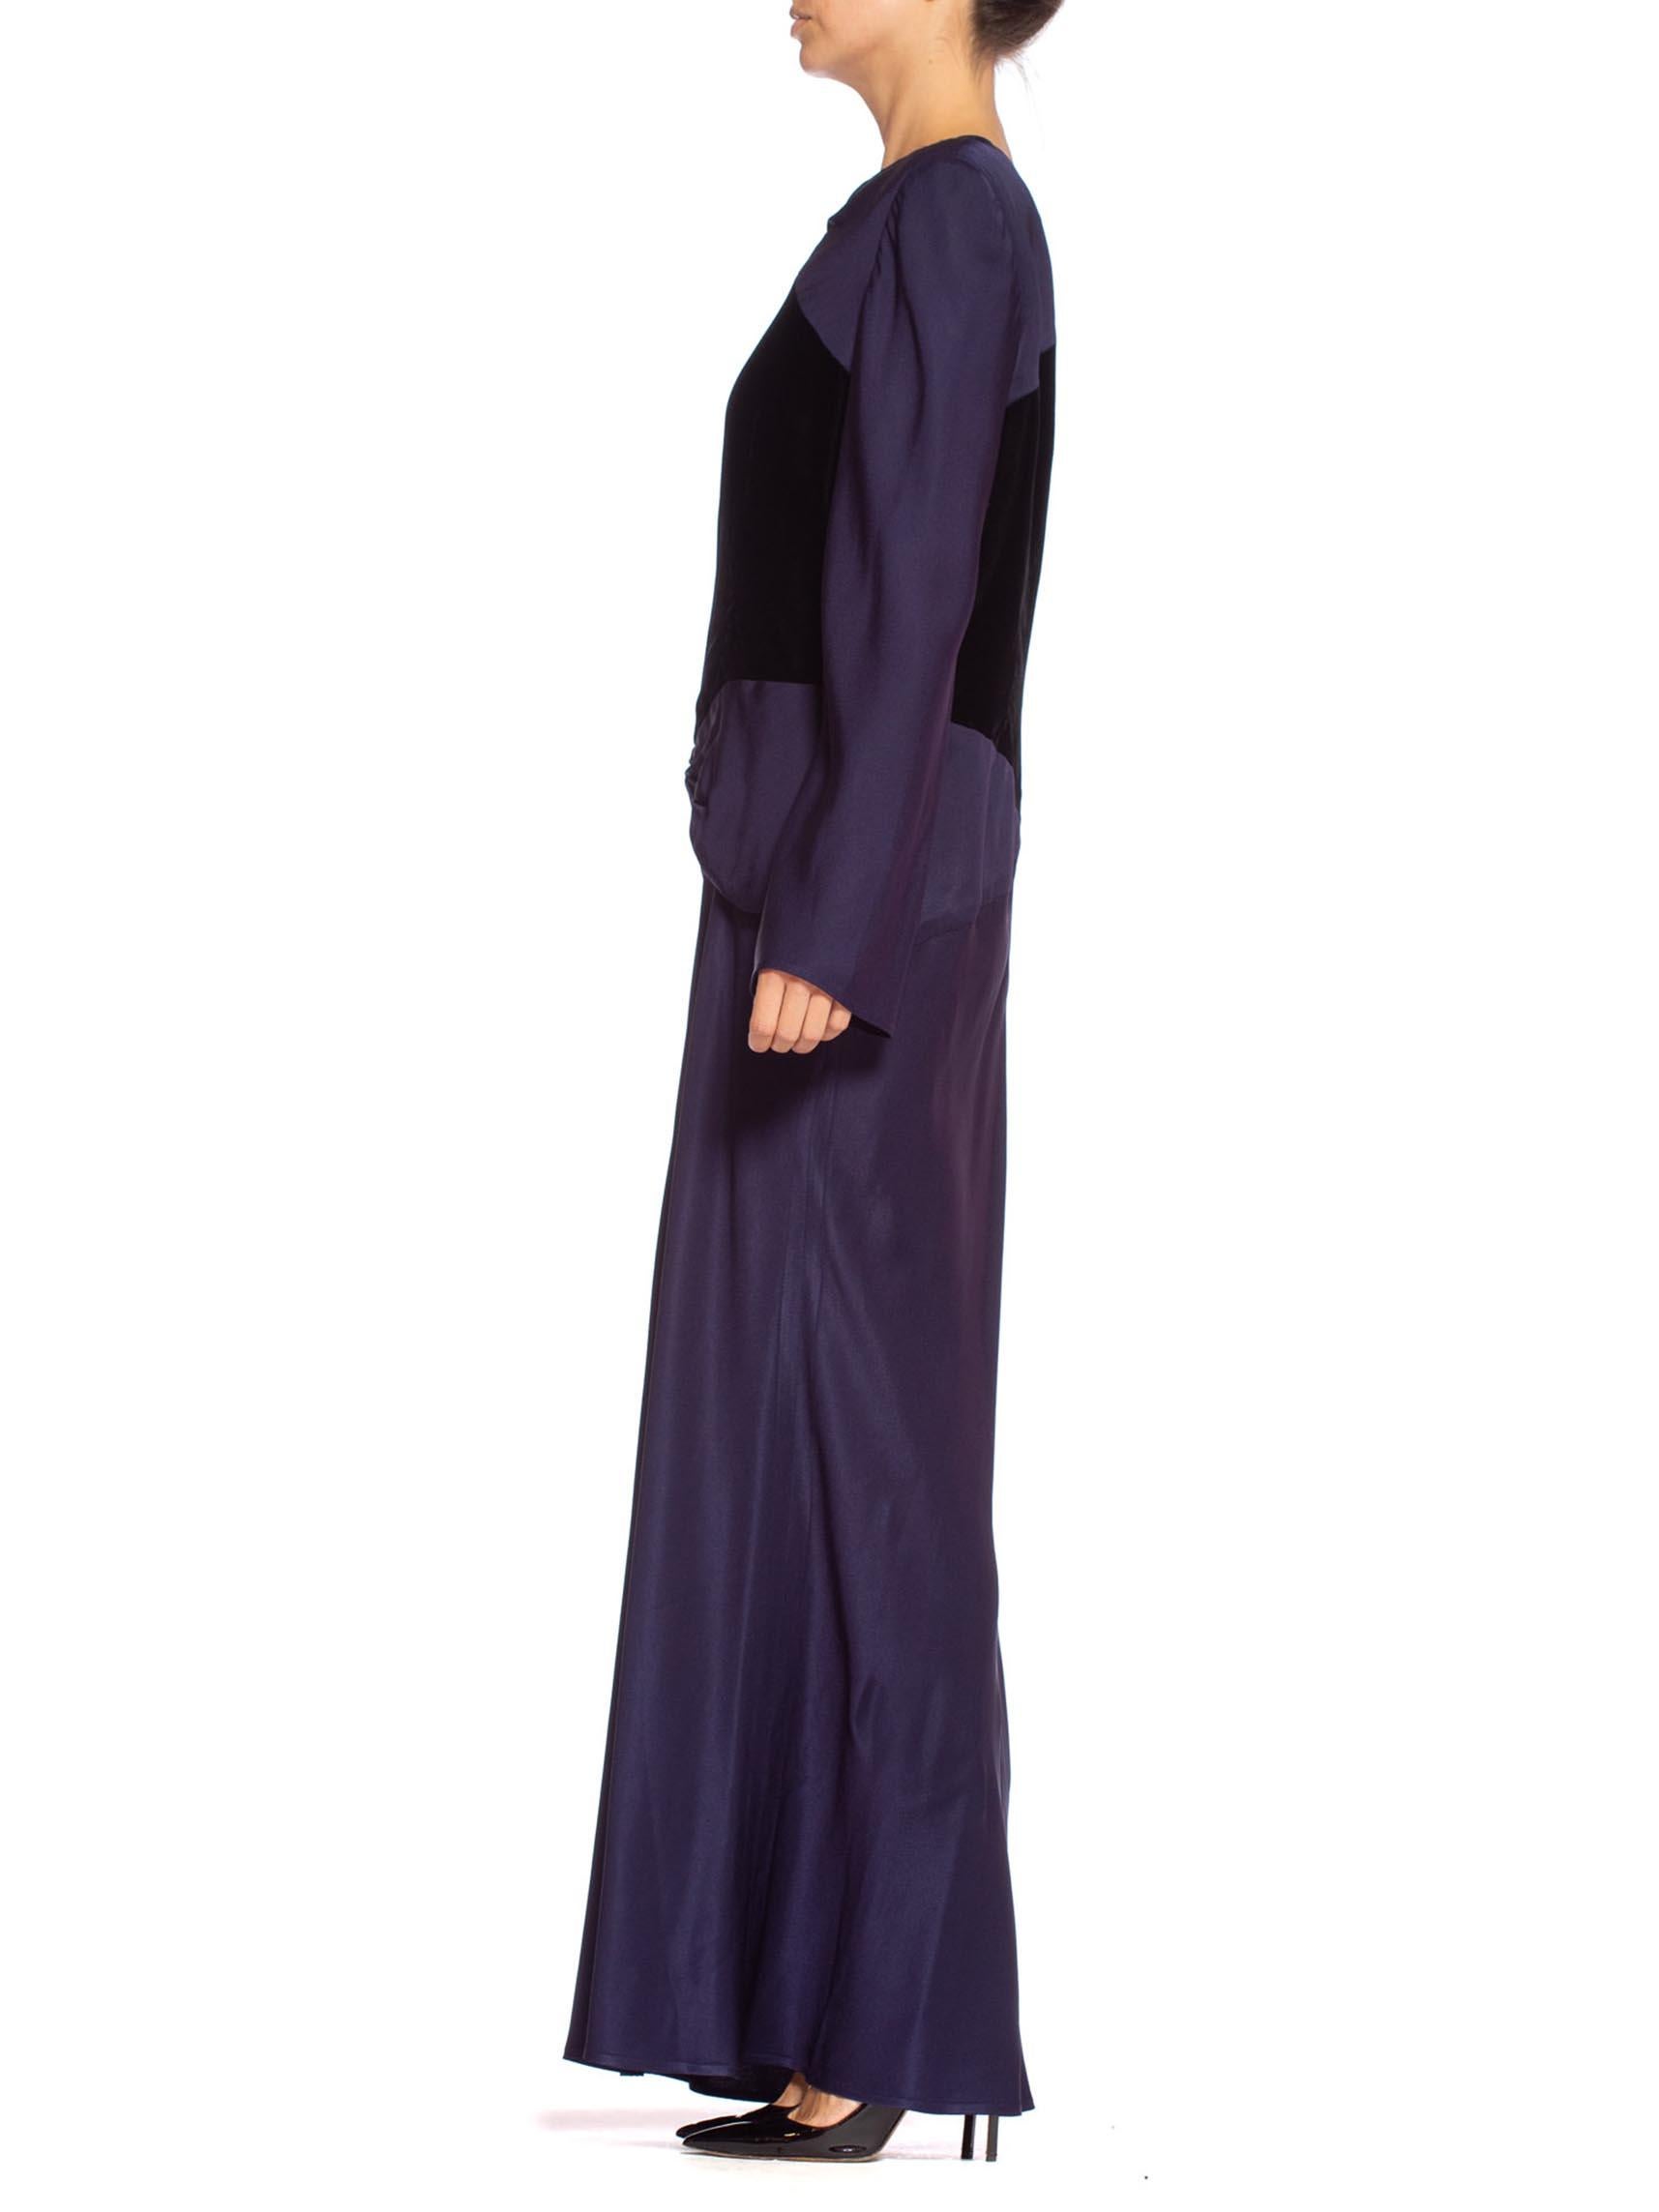 Black 1980'S BILL BLASS Navy Blue Haute Couture Silk Crepe Back Satin Sleeved Gown Wi